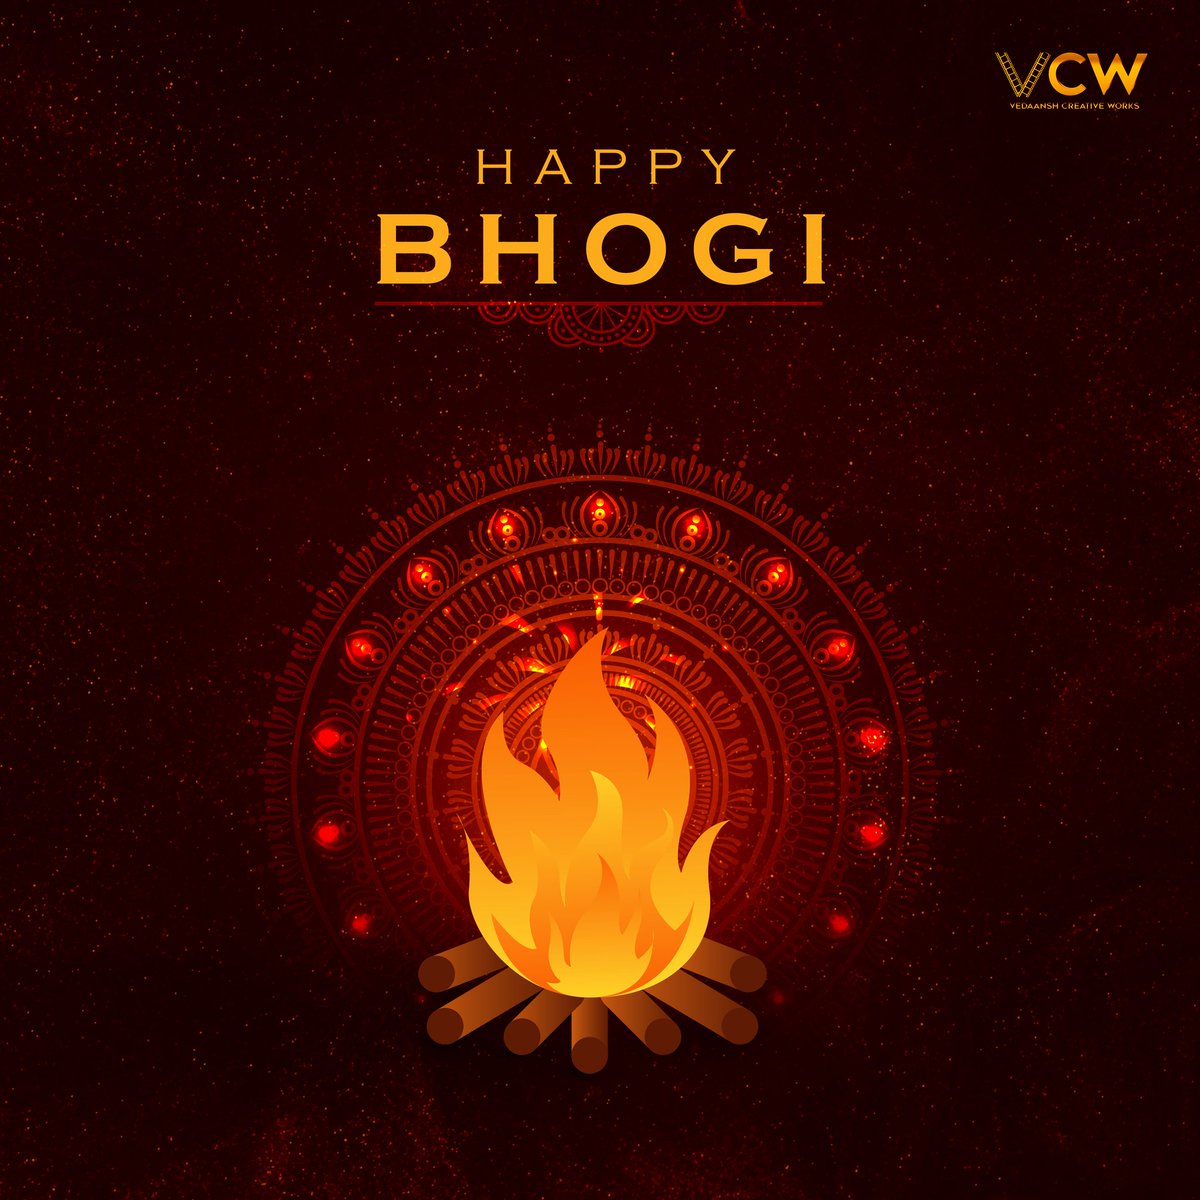 May the auspicious festive occasion bring along prosperity and success to you and your dearest ones. #HappyBhogi everyone!!